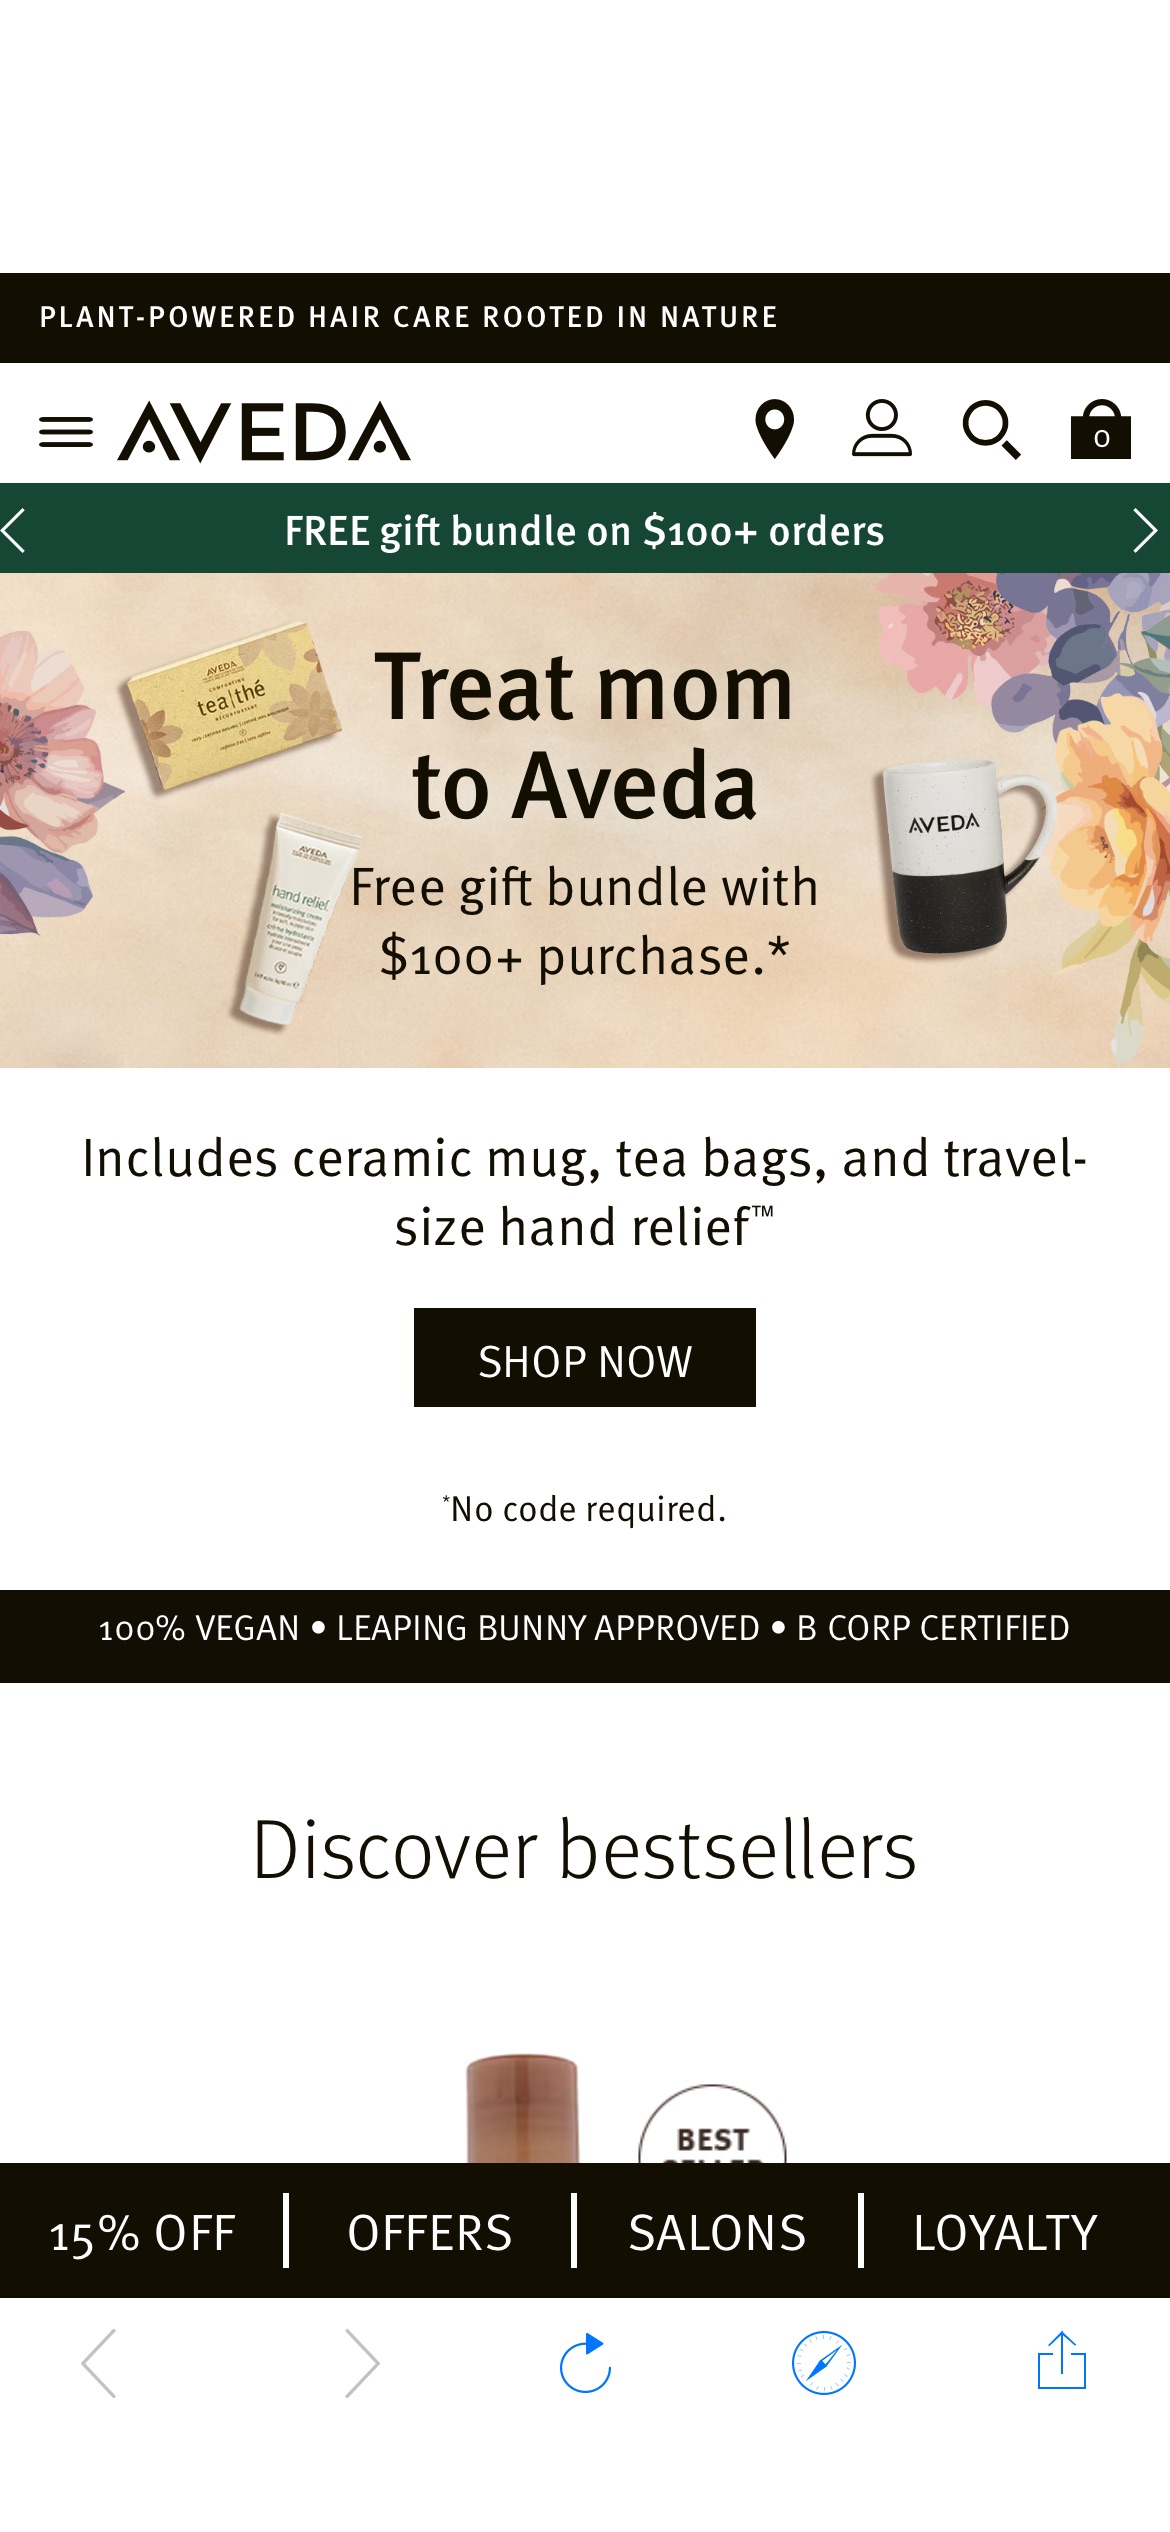 Free gift bundle with
$100+ purchase.*
Includes ceramic mug, tea bags, and travel-size hand relief™